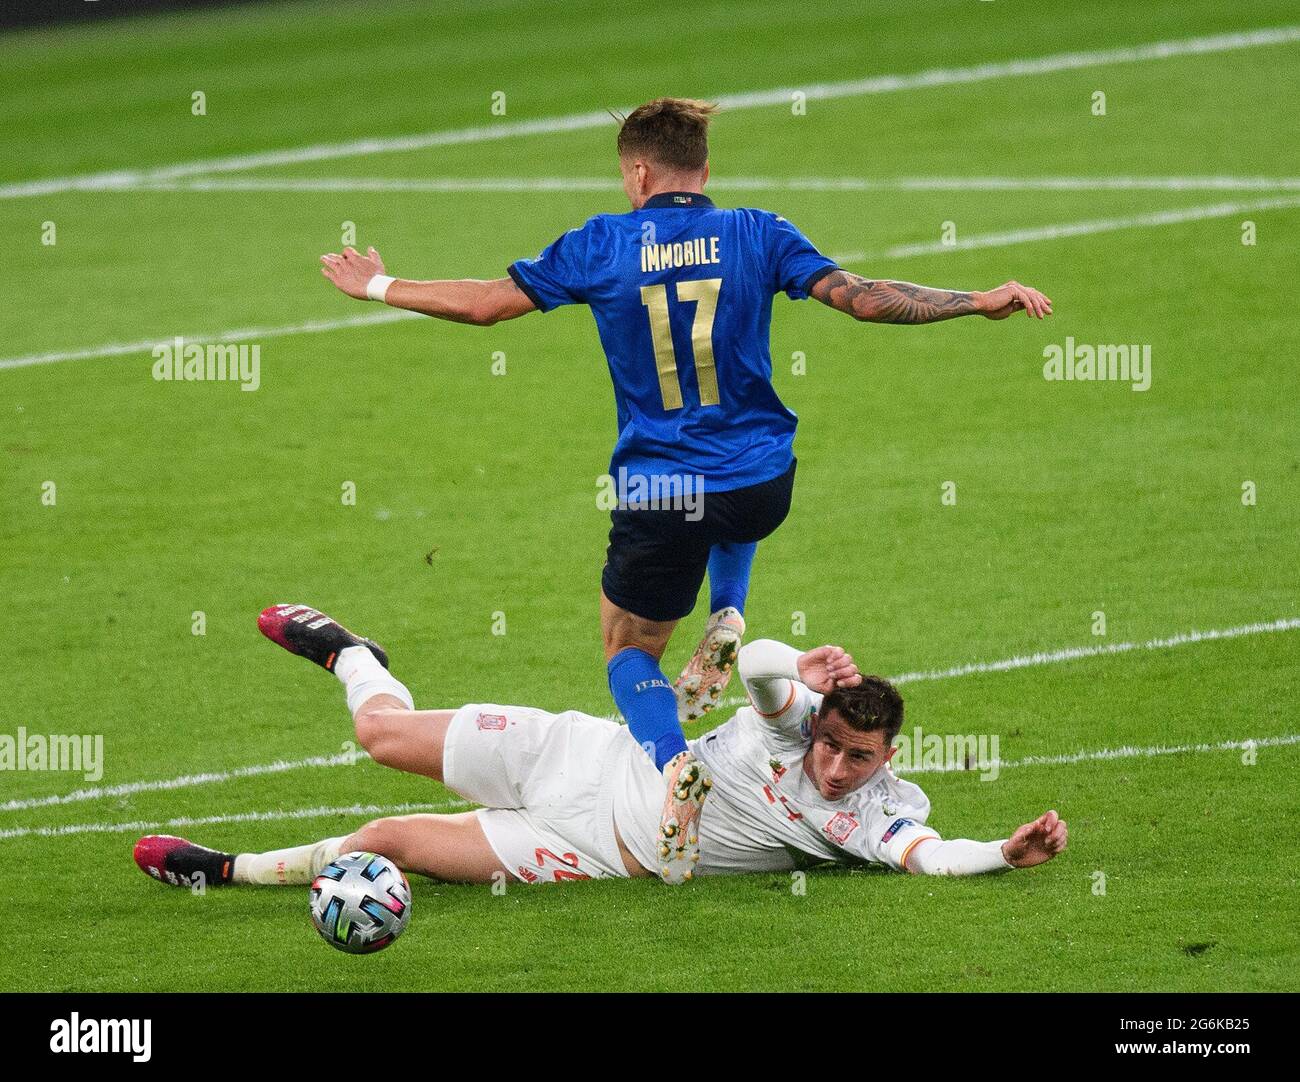 07 July 2021 - Italy v Spain - UEFA Euro 2020 Semi-Final - Wembley - London  Italy's Ciro Immobile tackled by Aymeric Laporte Picture Credit : © Mark Pain / Alamy Live News Stock Photo